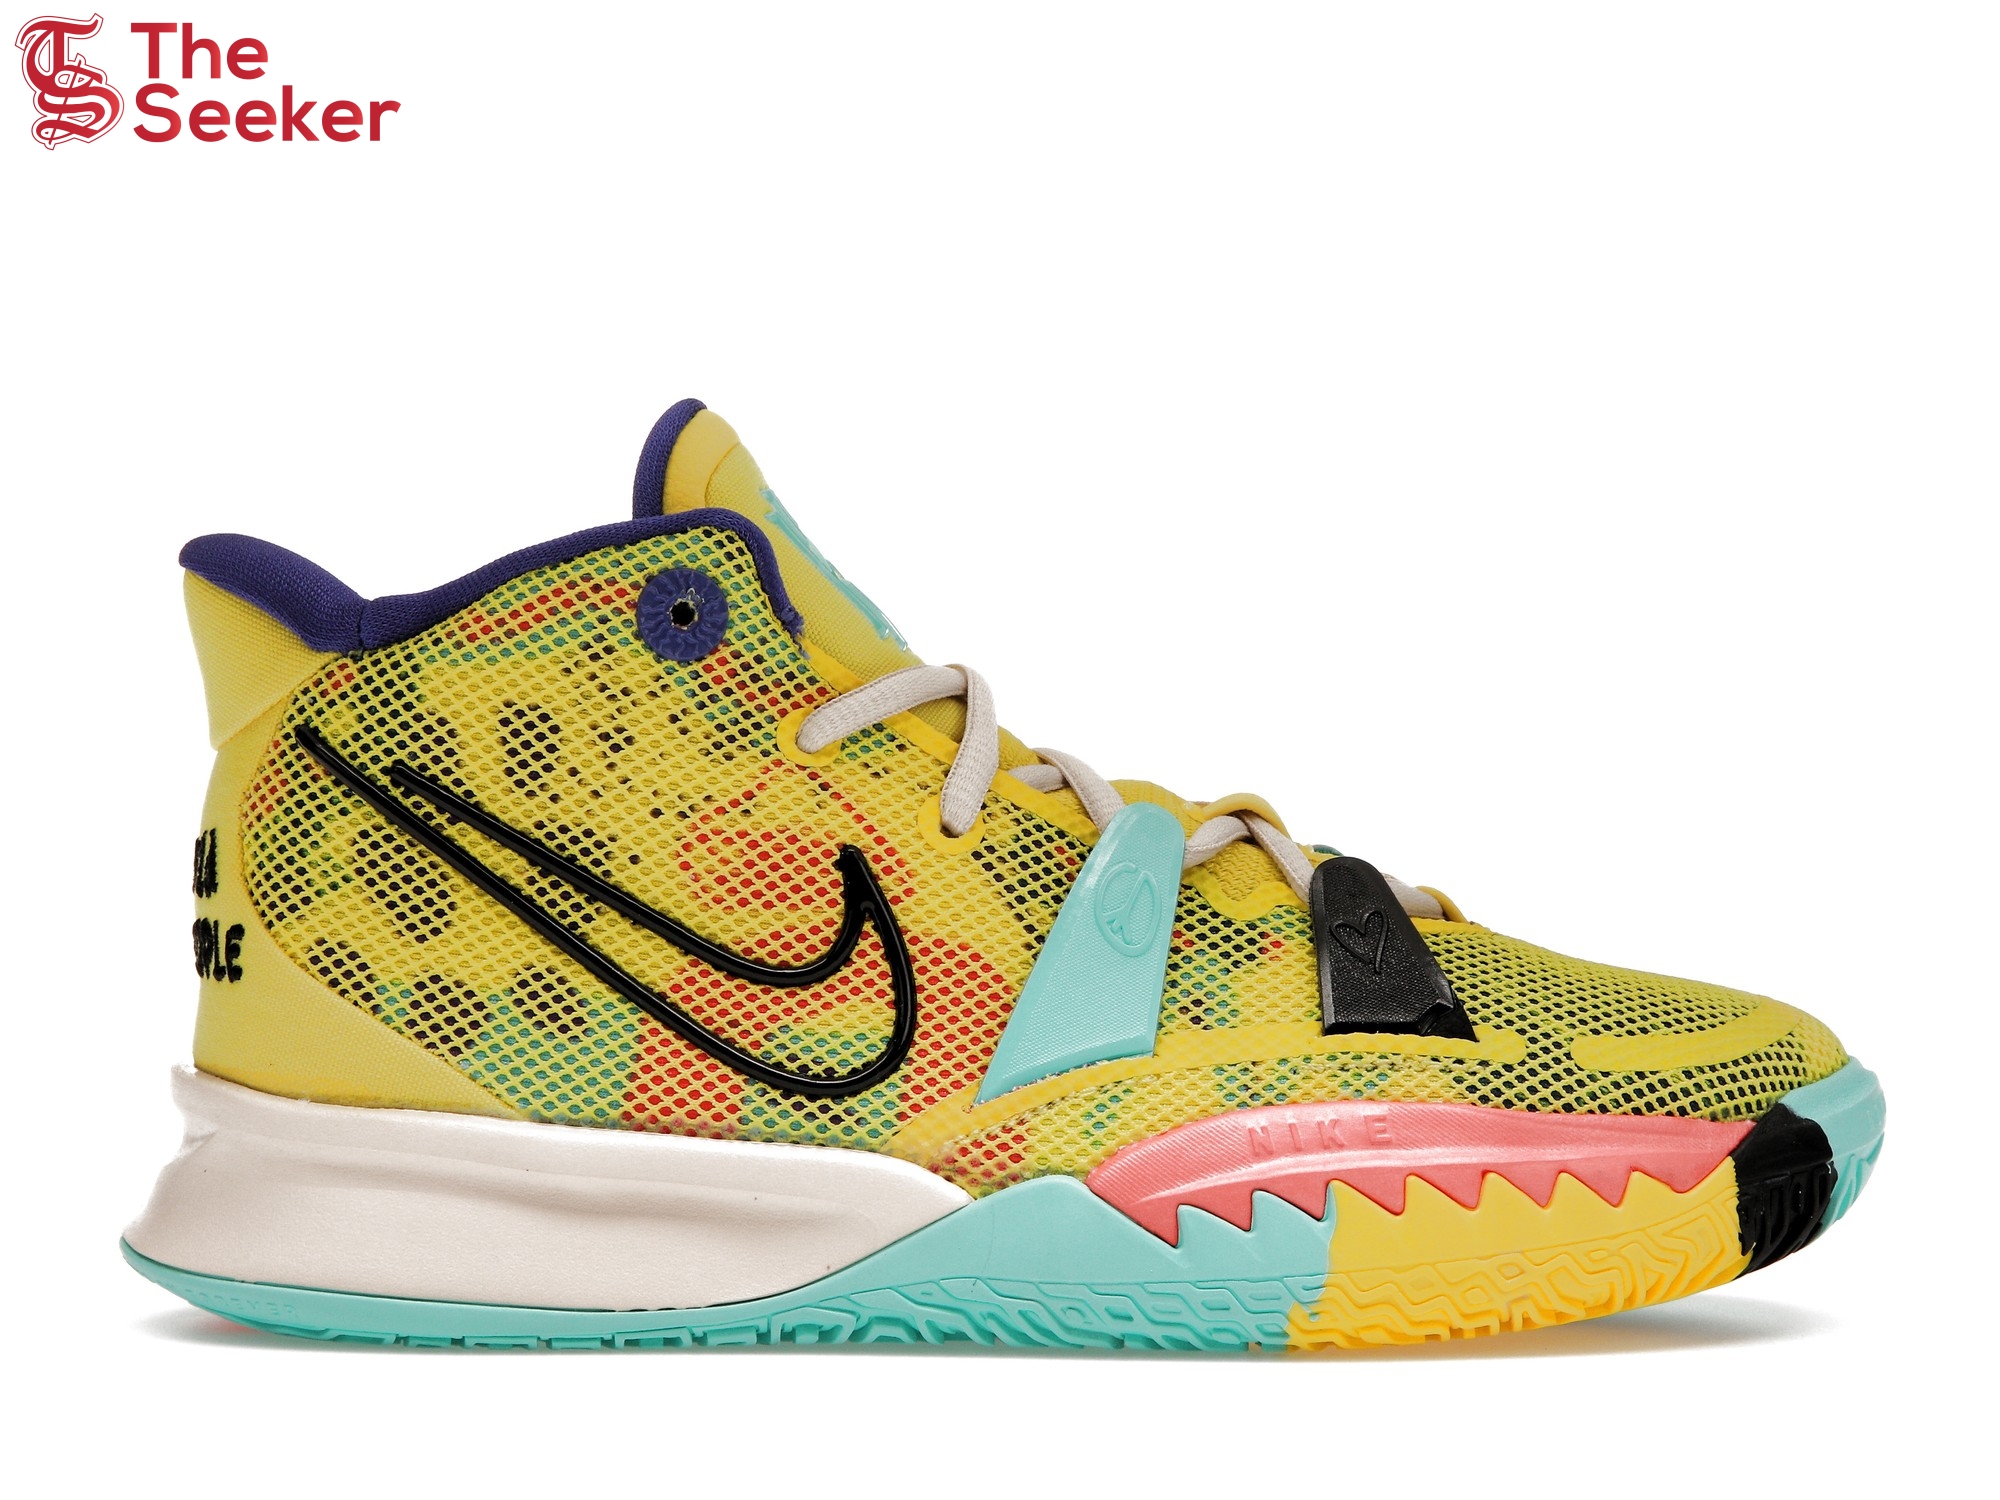 Nike Kyrie 7 1 World 1 People Electric Yellow (GS)